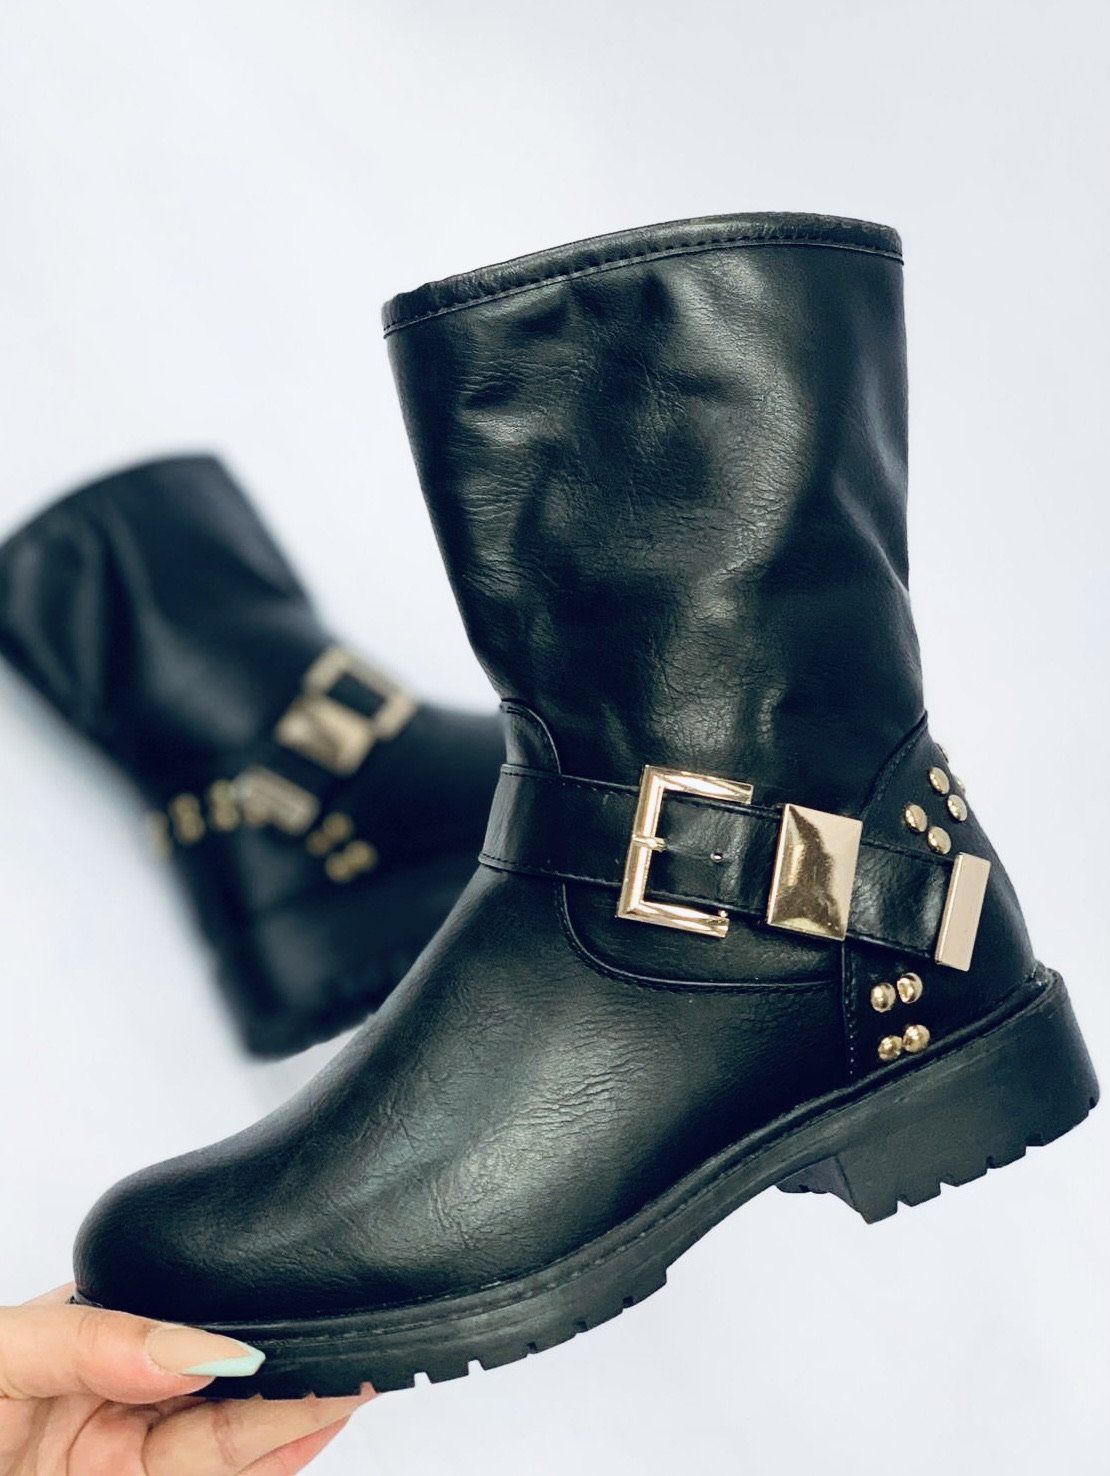 No.39 “TAMISHA” Black Ankle Boots With Gold Detailing